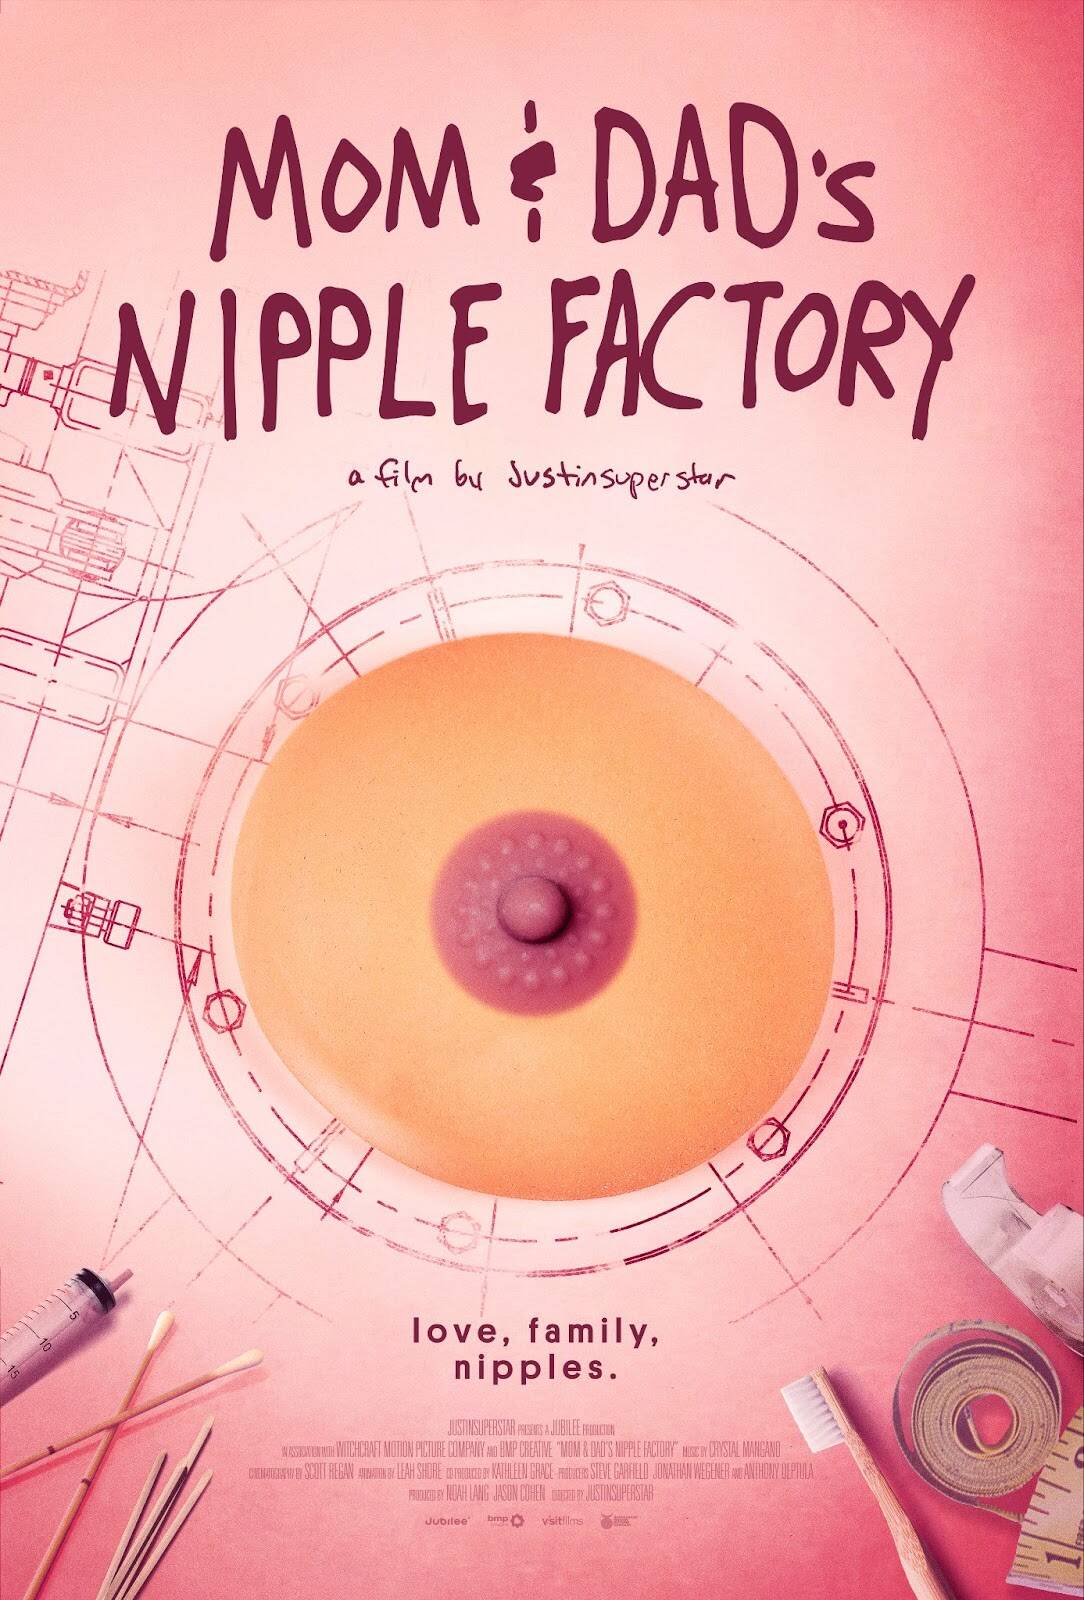 Promotional poster for “Mom & Dad’s Nipple Factory.” Photo courtesy of JCPR&C